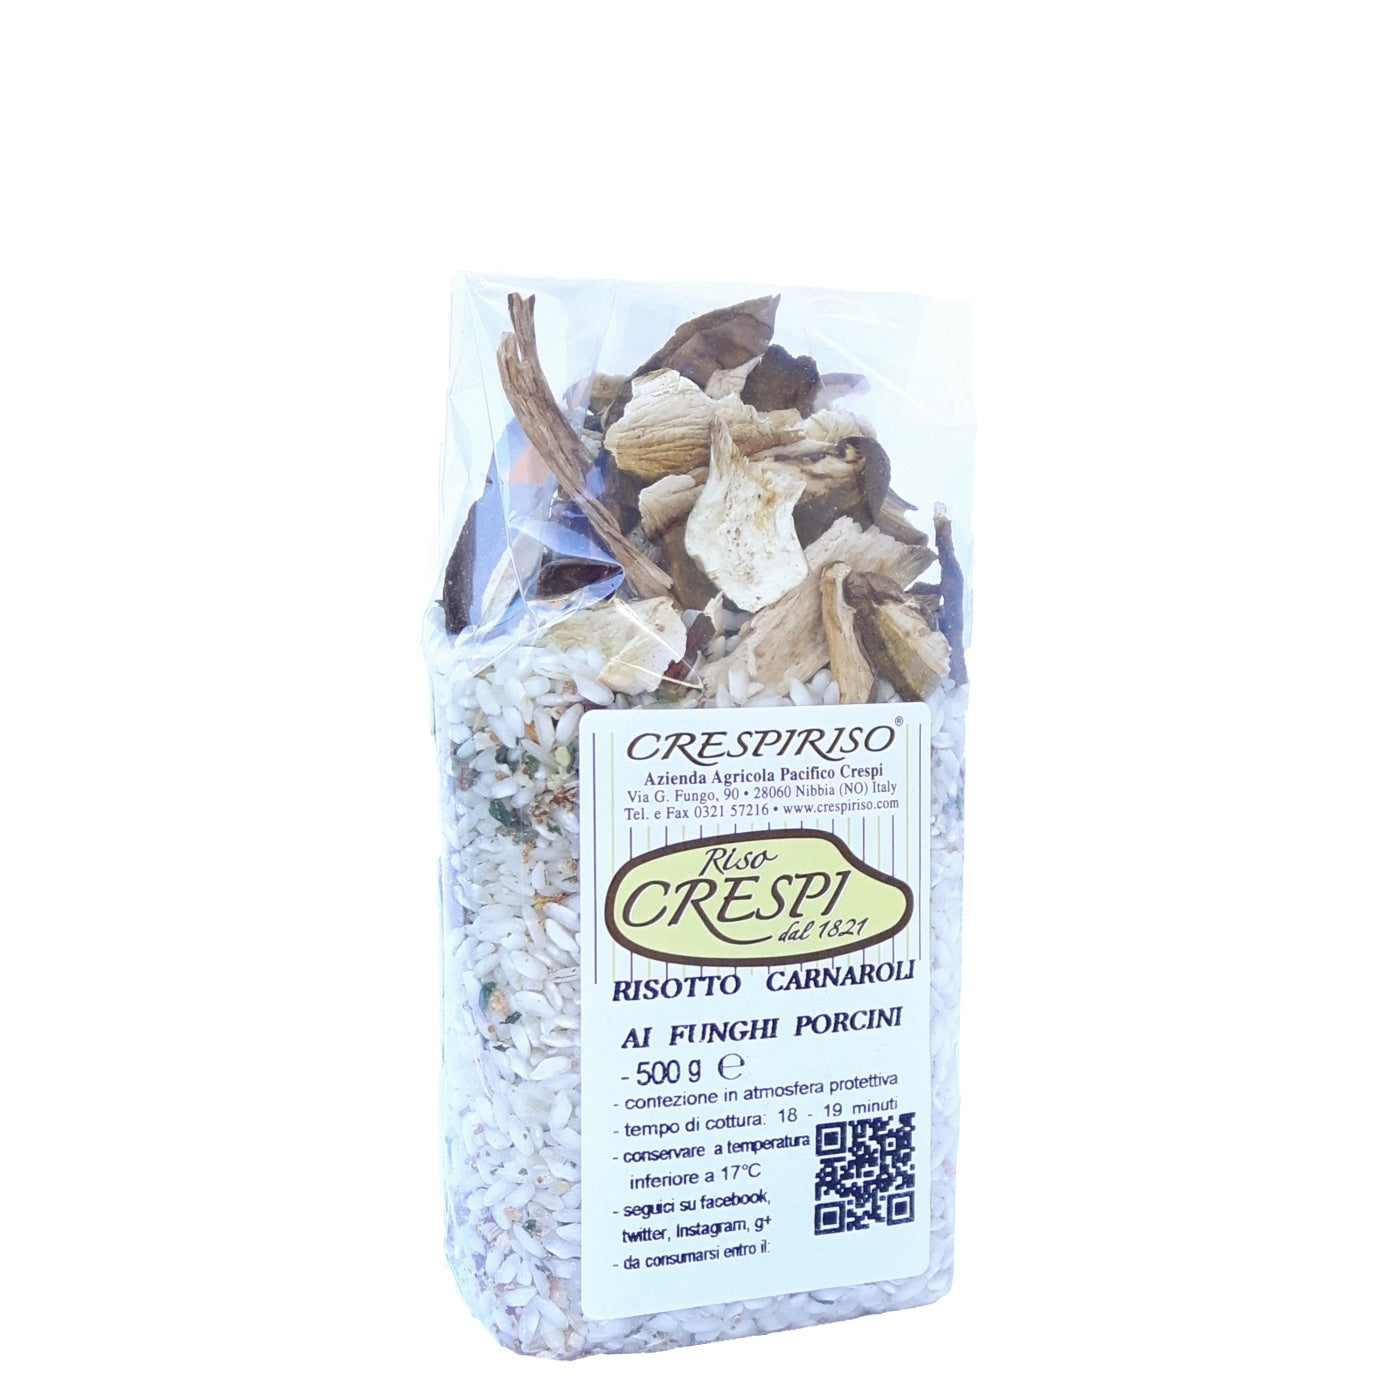 Ready-made risotto with crespiriso porcini mushrooms 300g